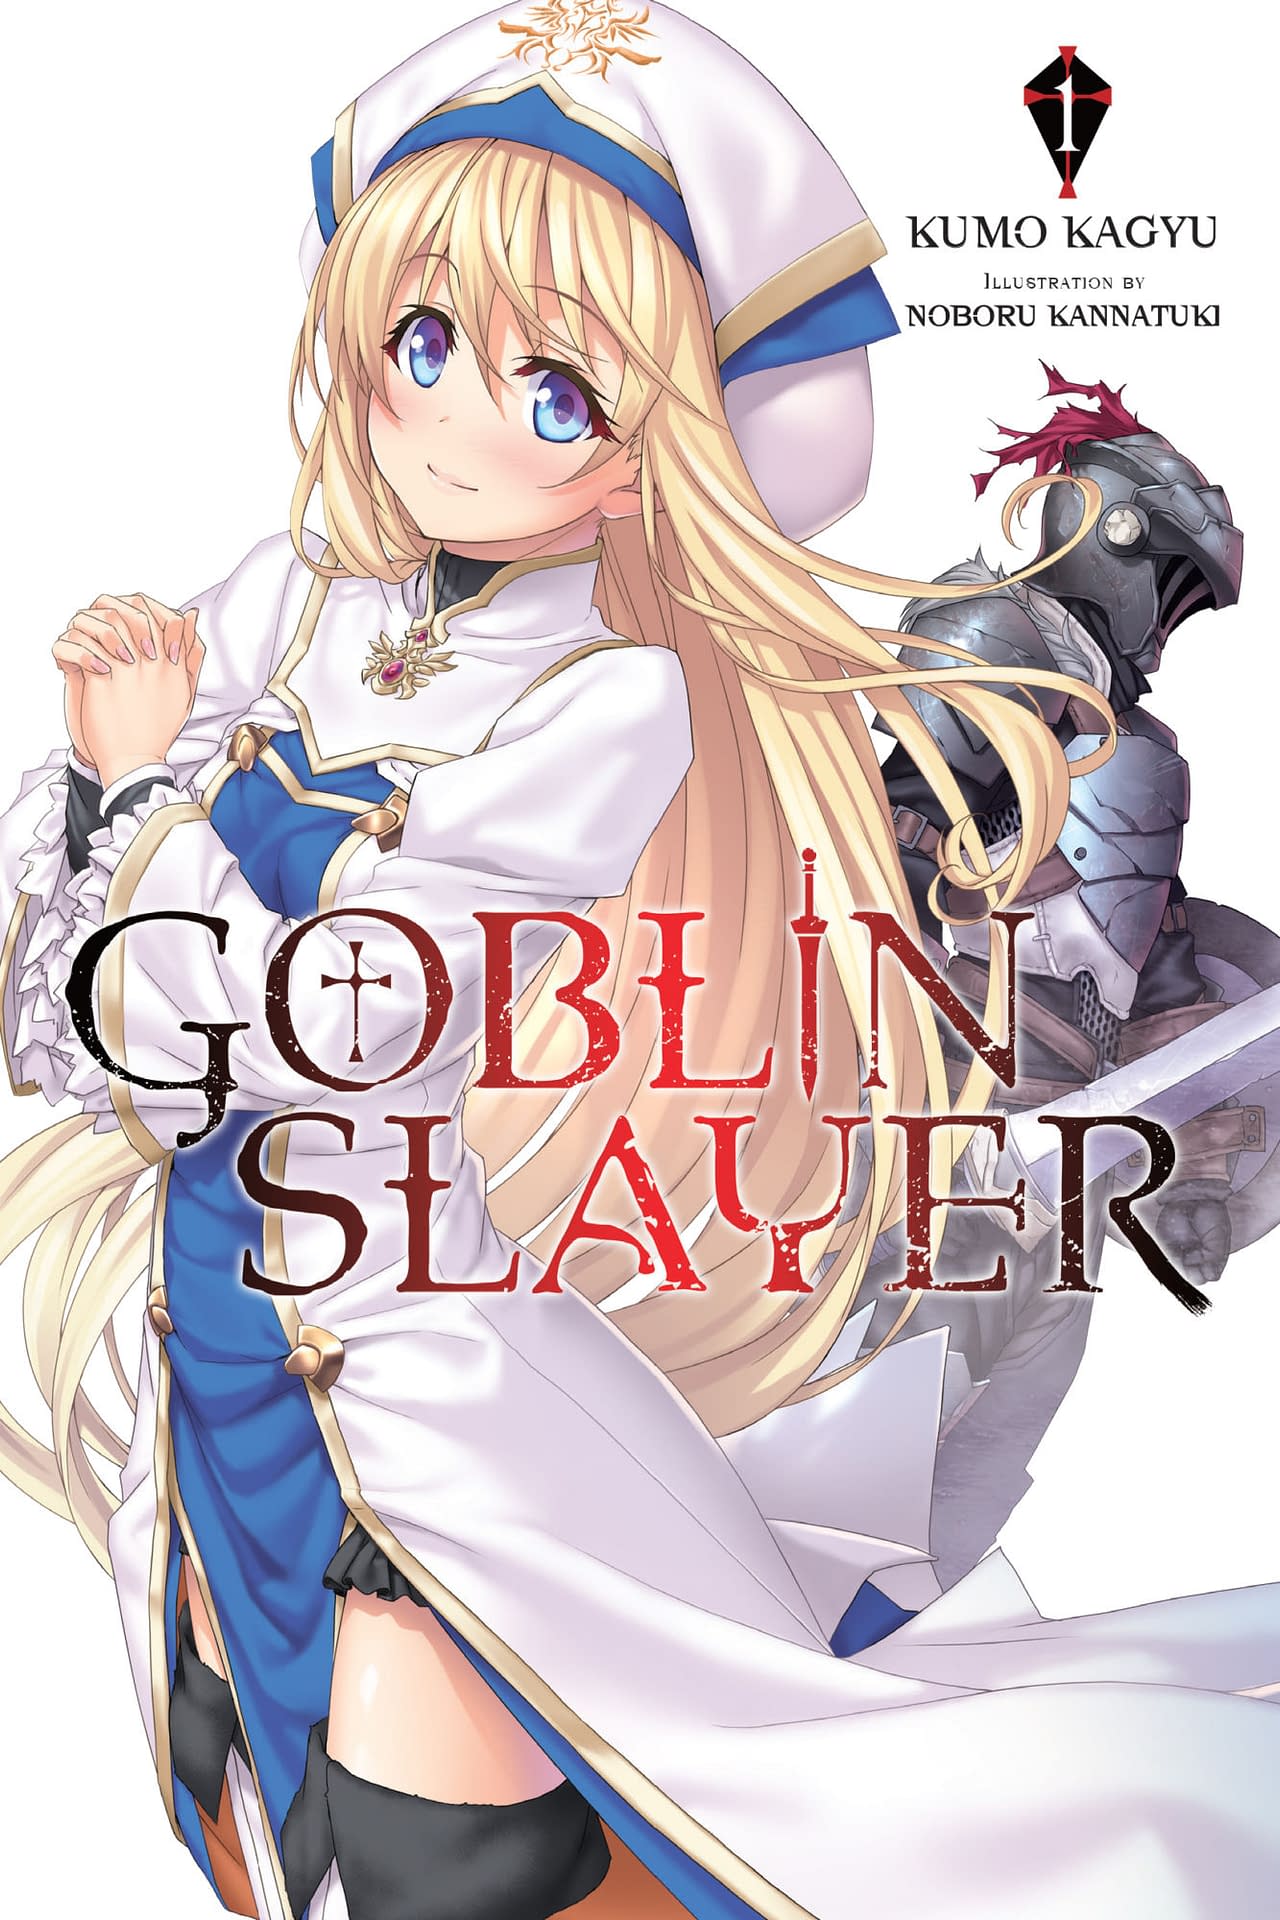 Today's the 2 year anniversary of the Goblin Slayer anime! Good